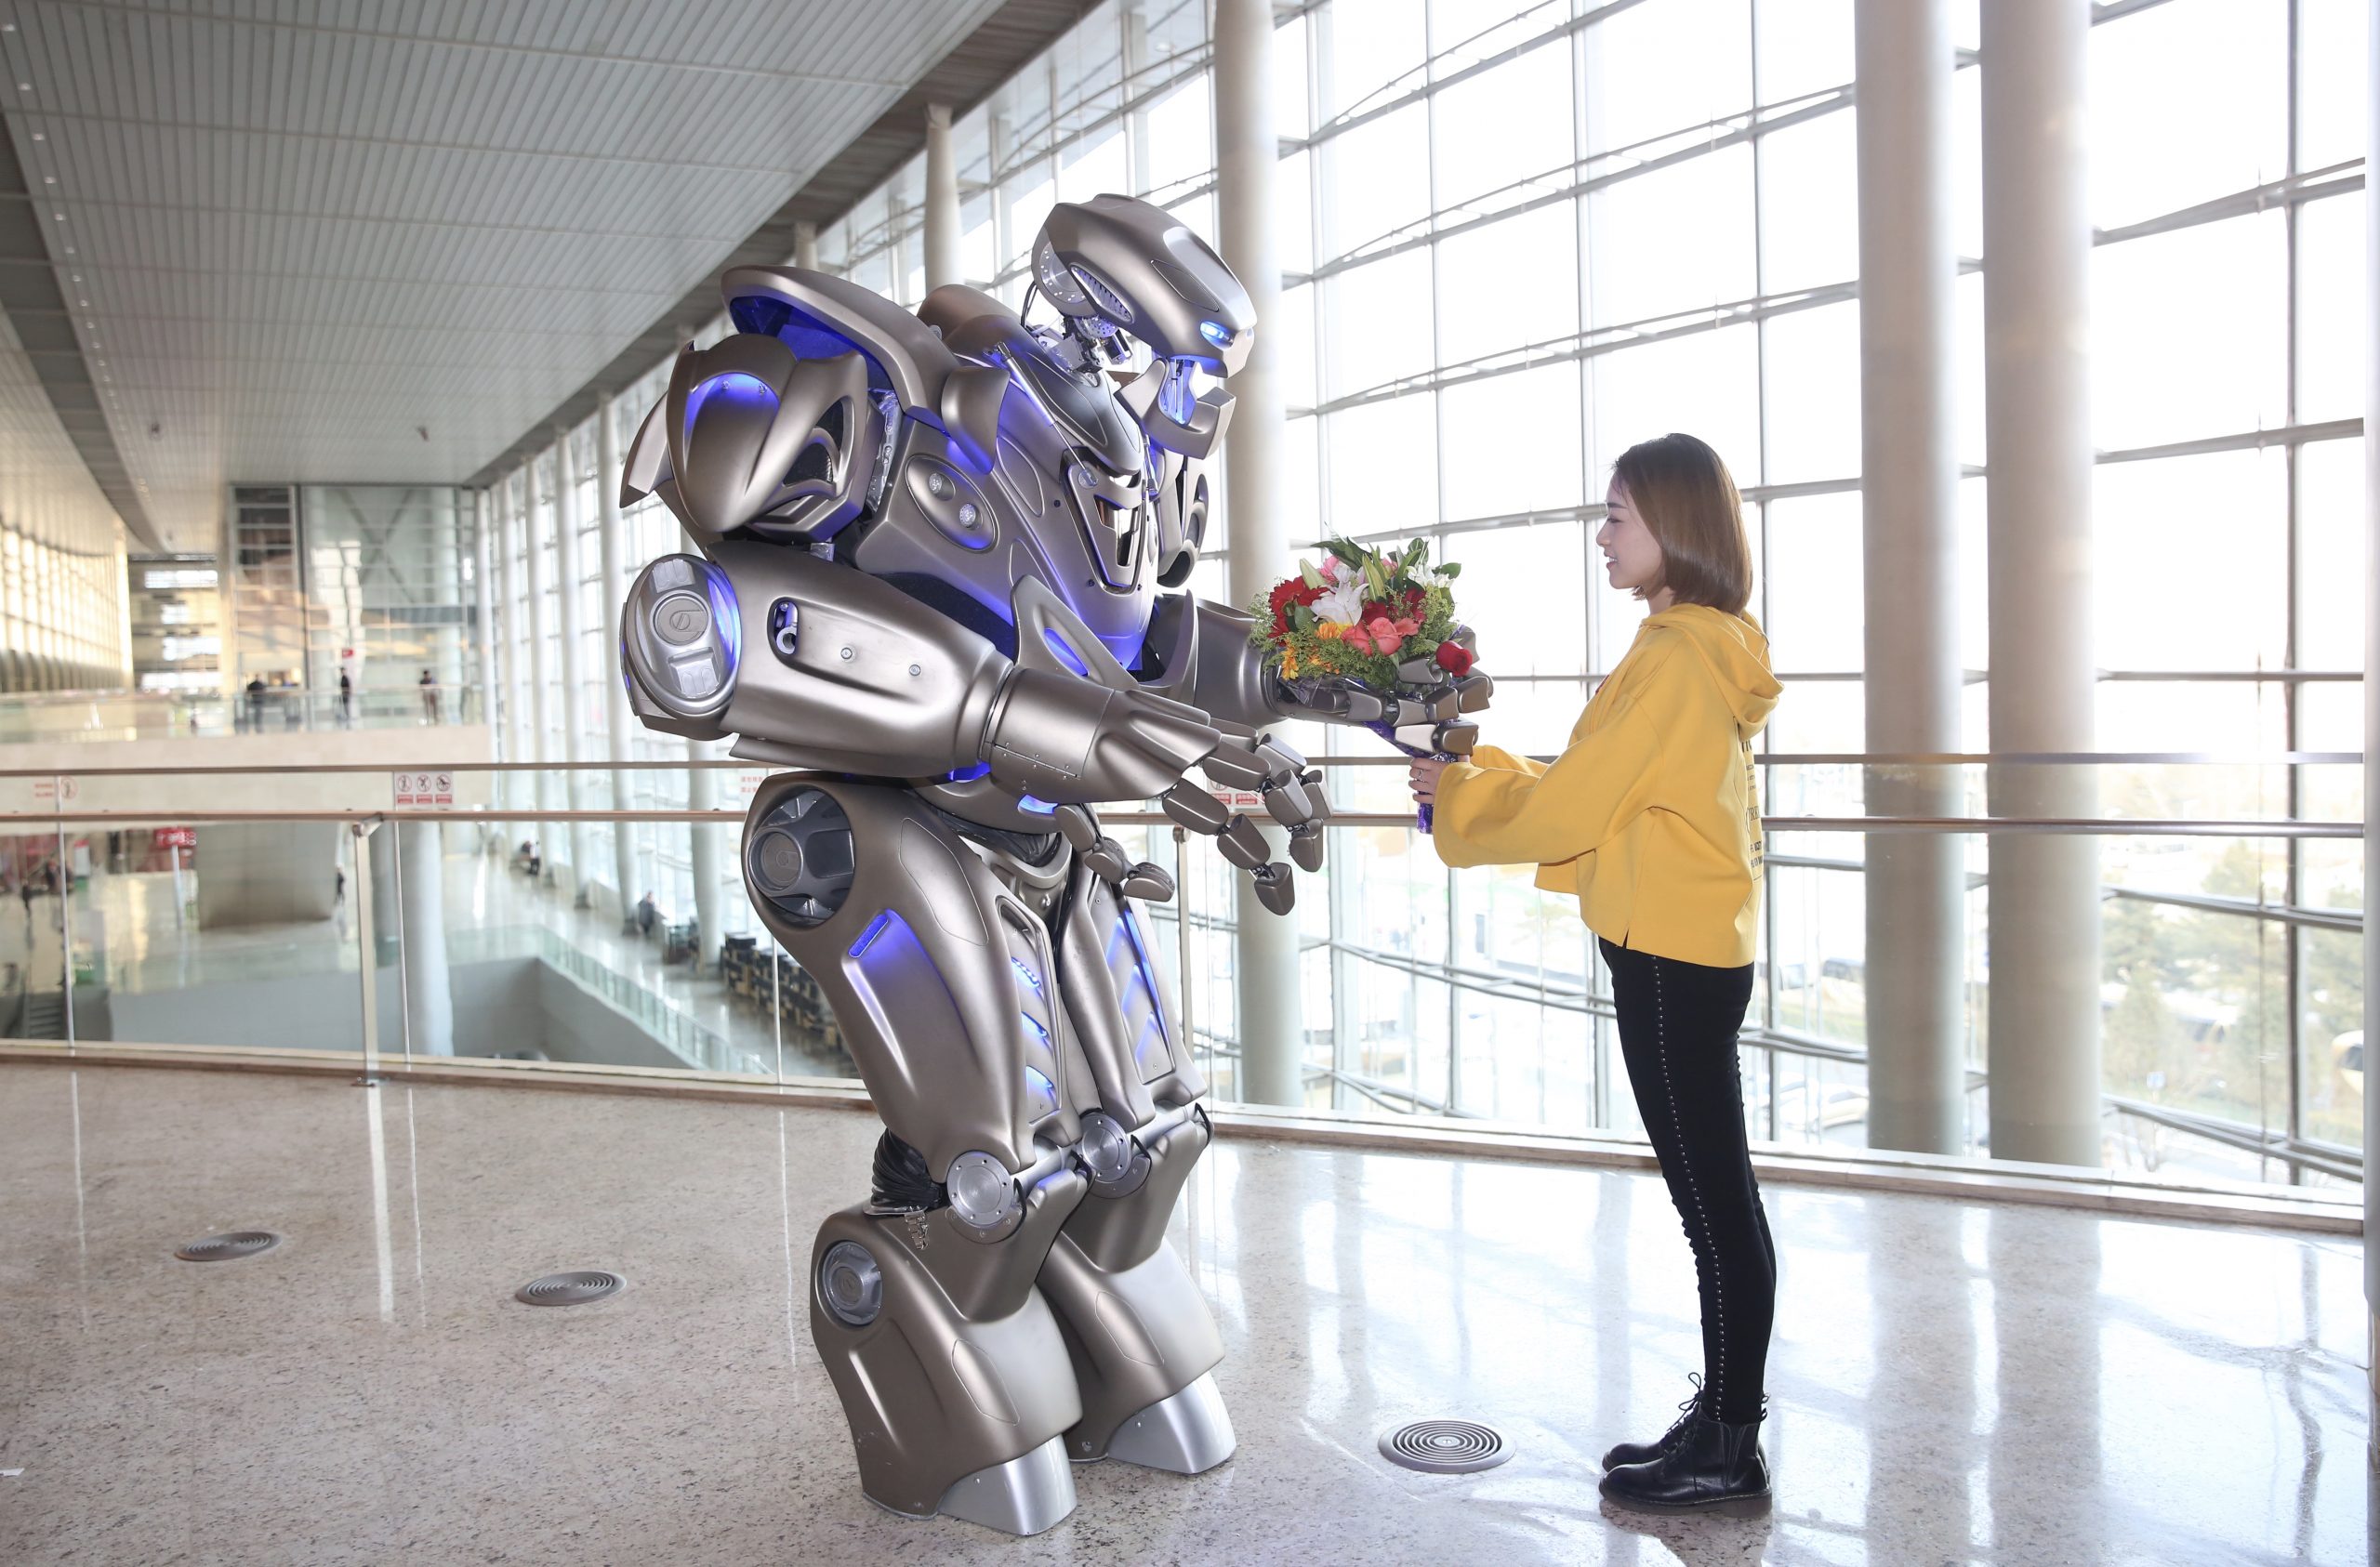 Titan the Robot gives a girls some flowers in China